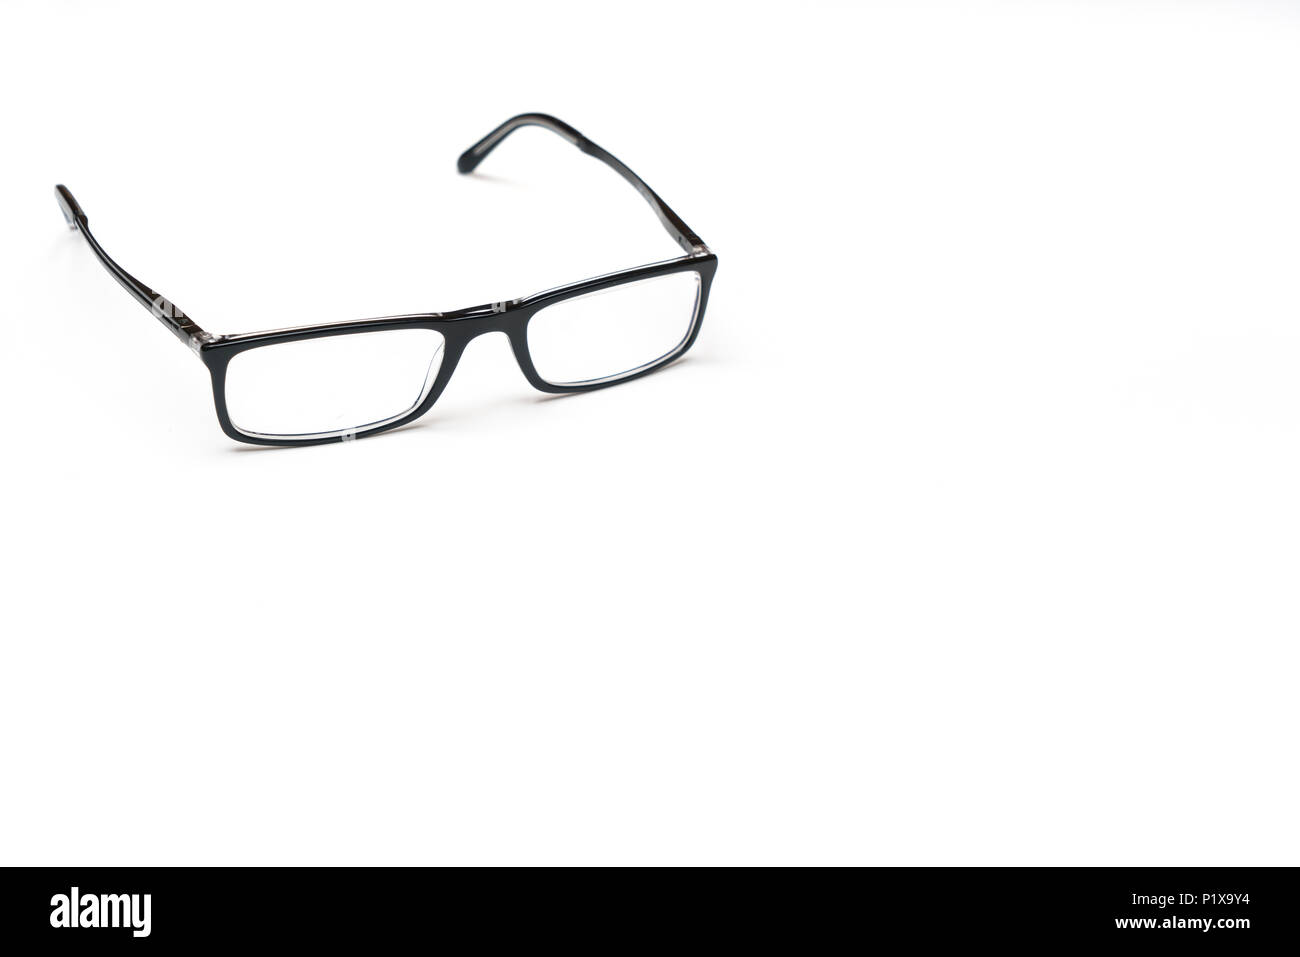 a pair of eyeglasses on a white surface Stock Photo